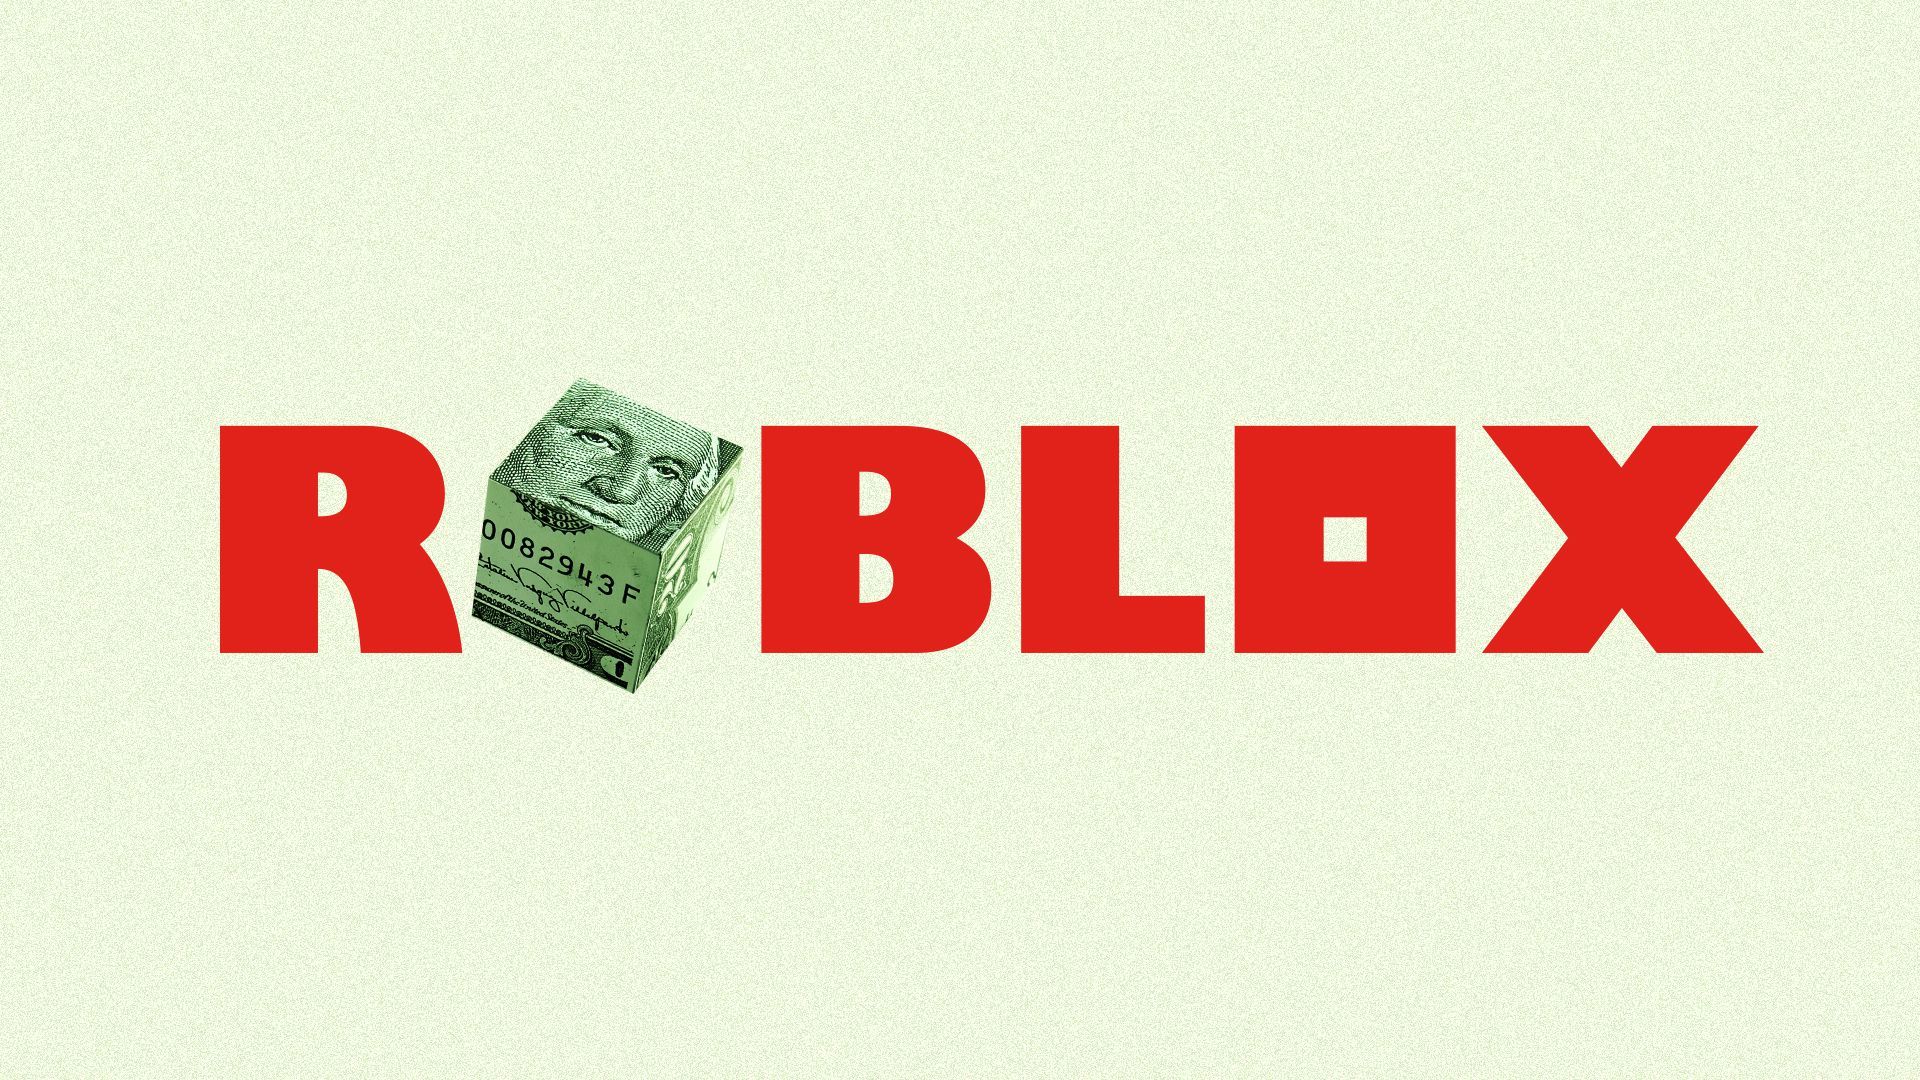 Illustration of the Roblox logo with a cube of money replacing one of the 'O's.